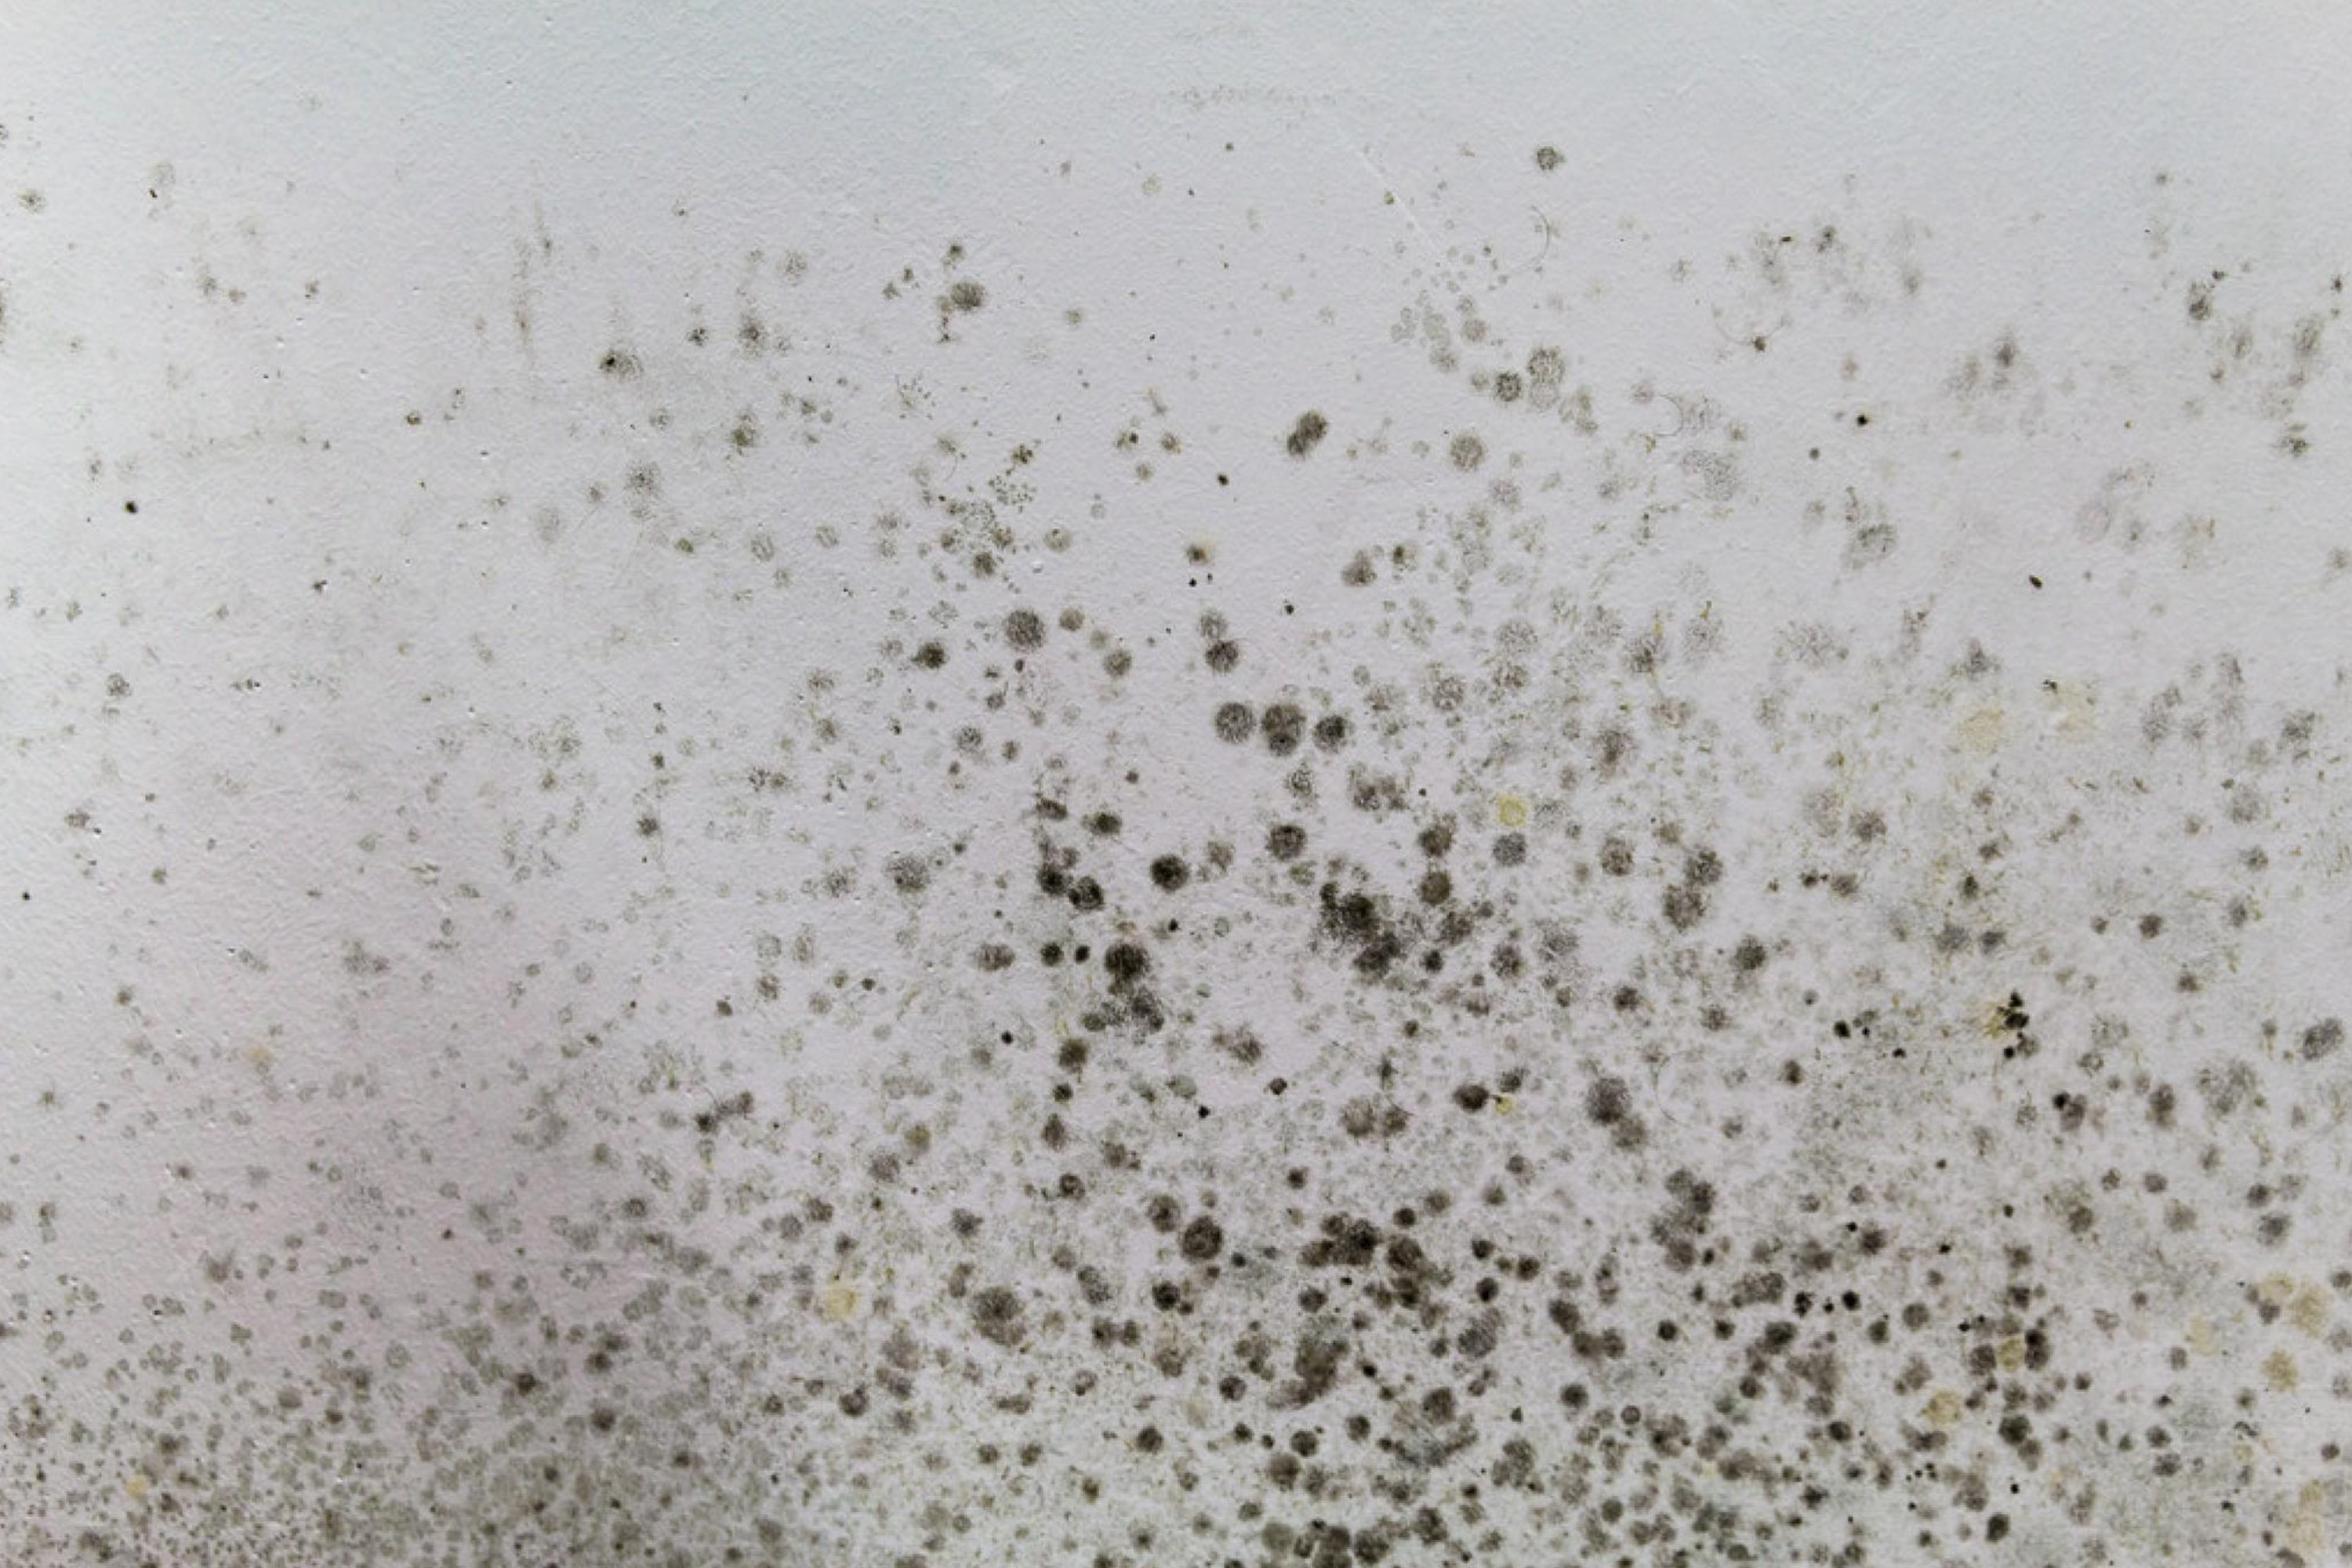 How to Treat Mold On Basement Walls